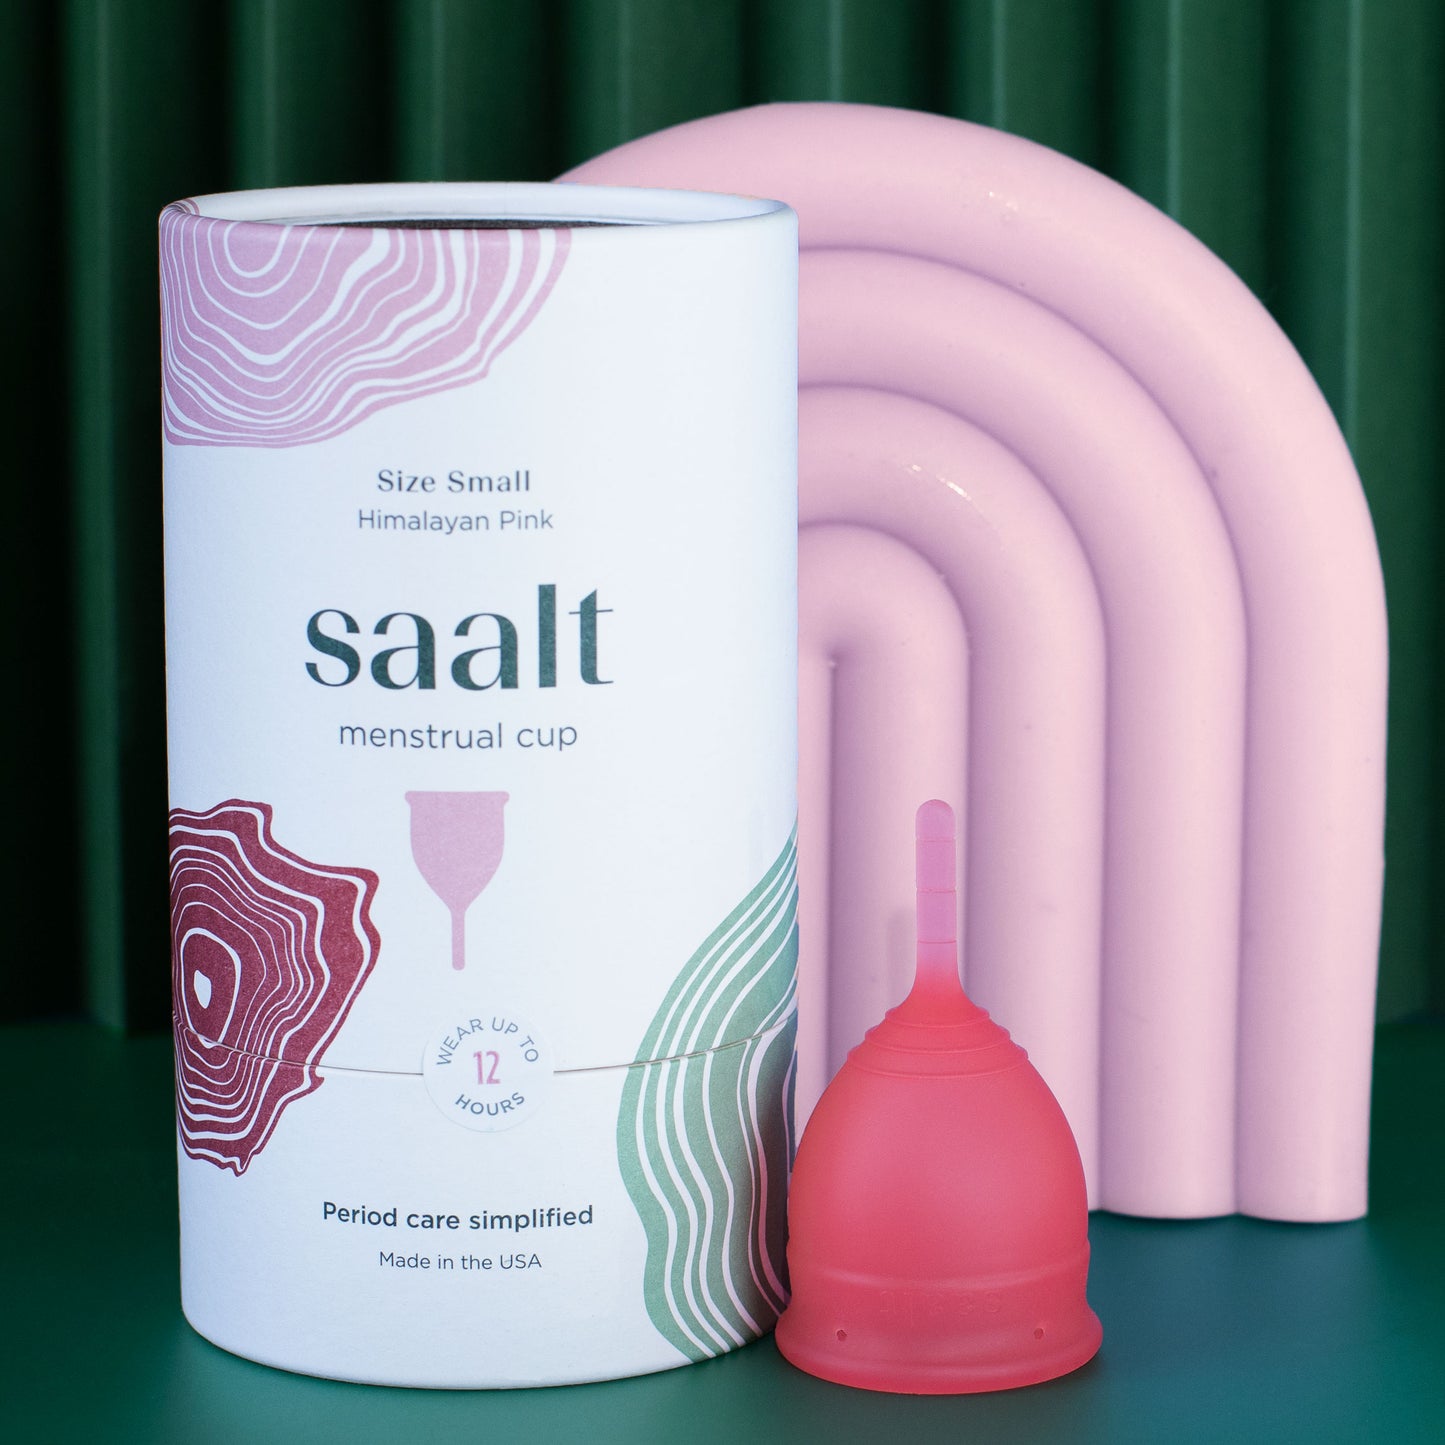 Saalt Small in Himalayan Pink with packaging